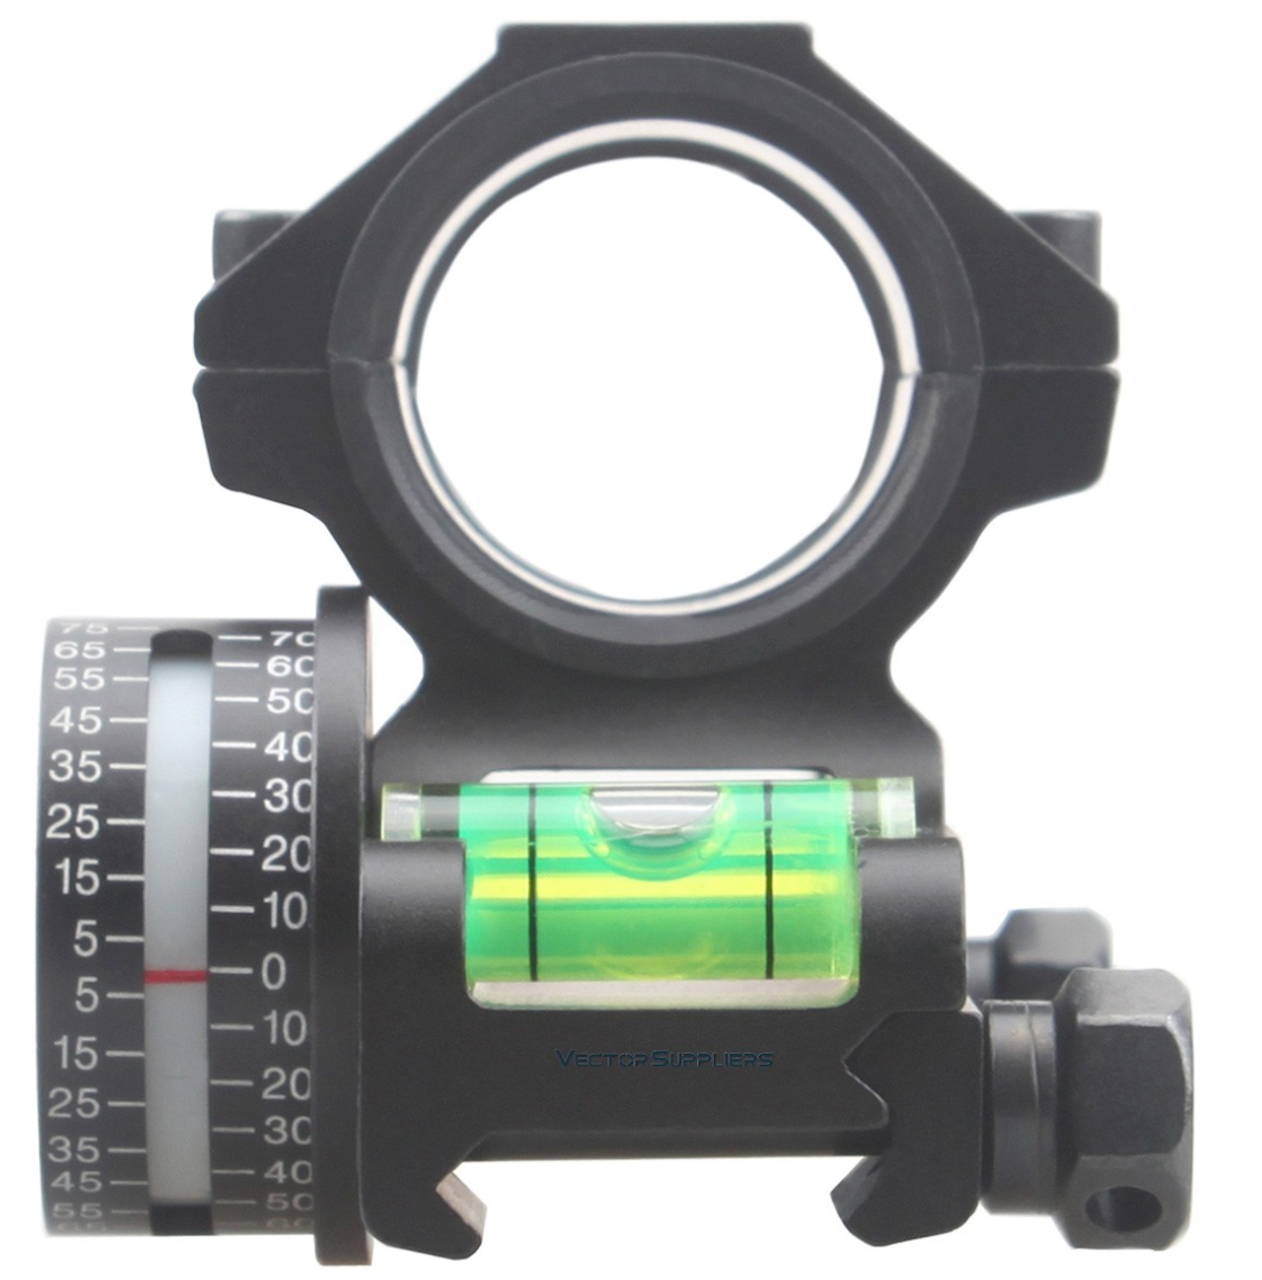 Anti Cant & Angle Measuring Scope Mount for 20mm Pica-Tinny Sight Rails.